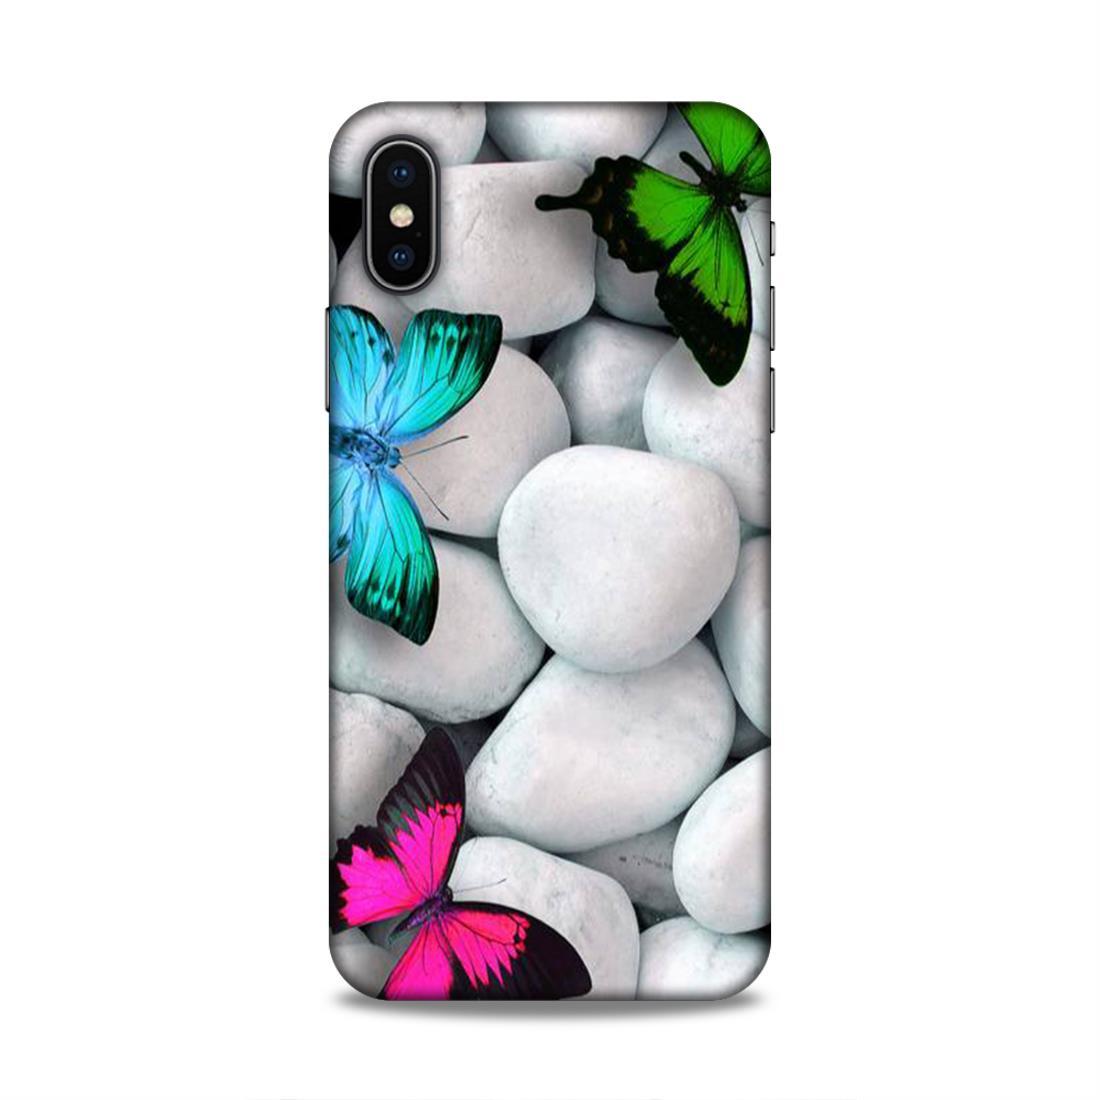 White Stone iPhone X Phone Case Cover